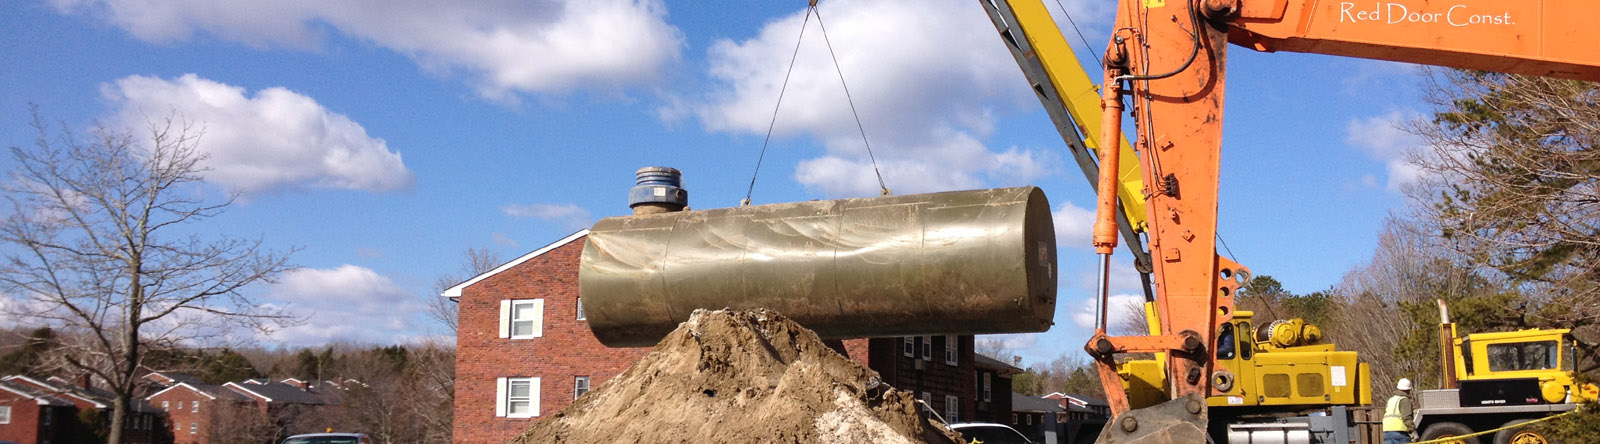 oil-tank-removal-and-abandonment-long-island-oil-tank-abandonment